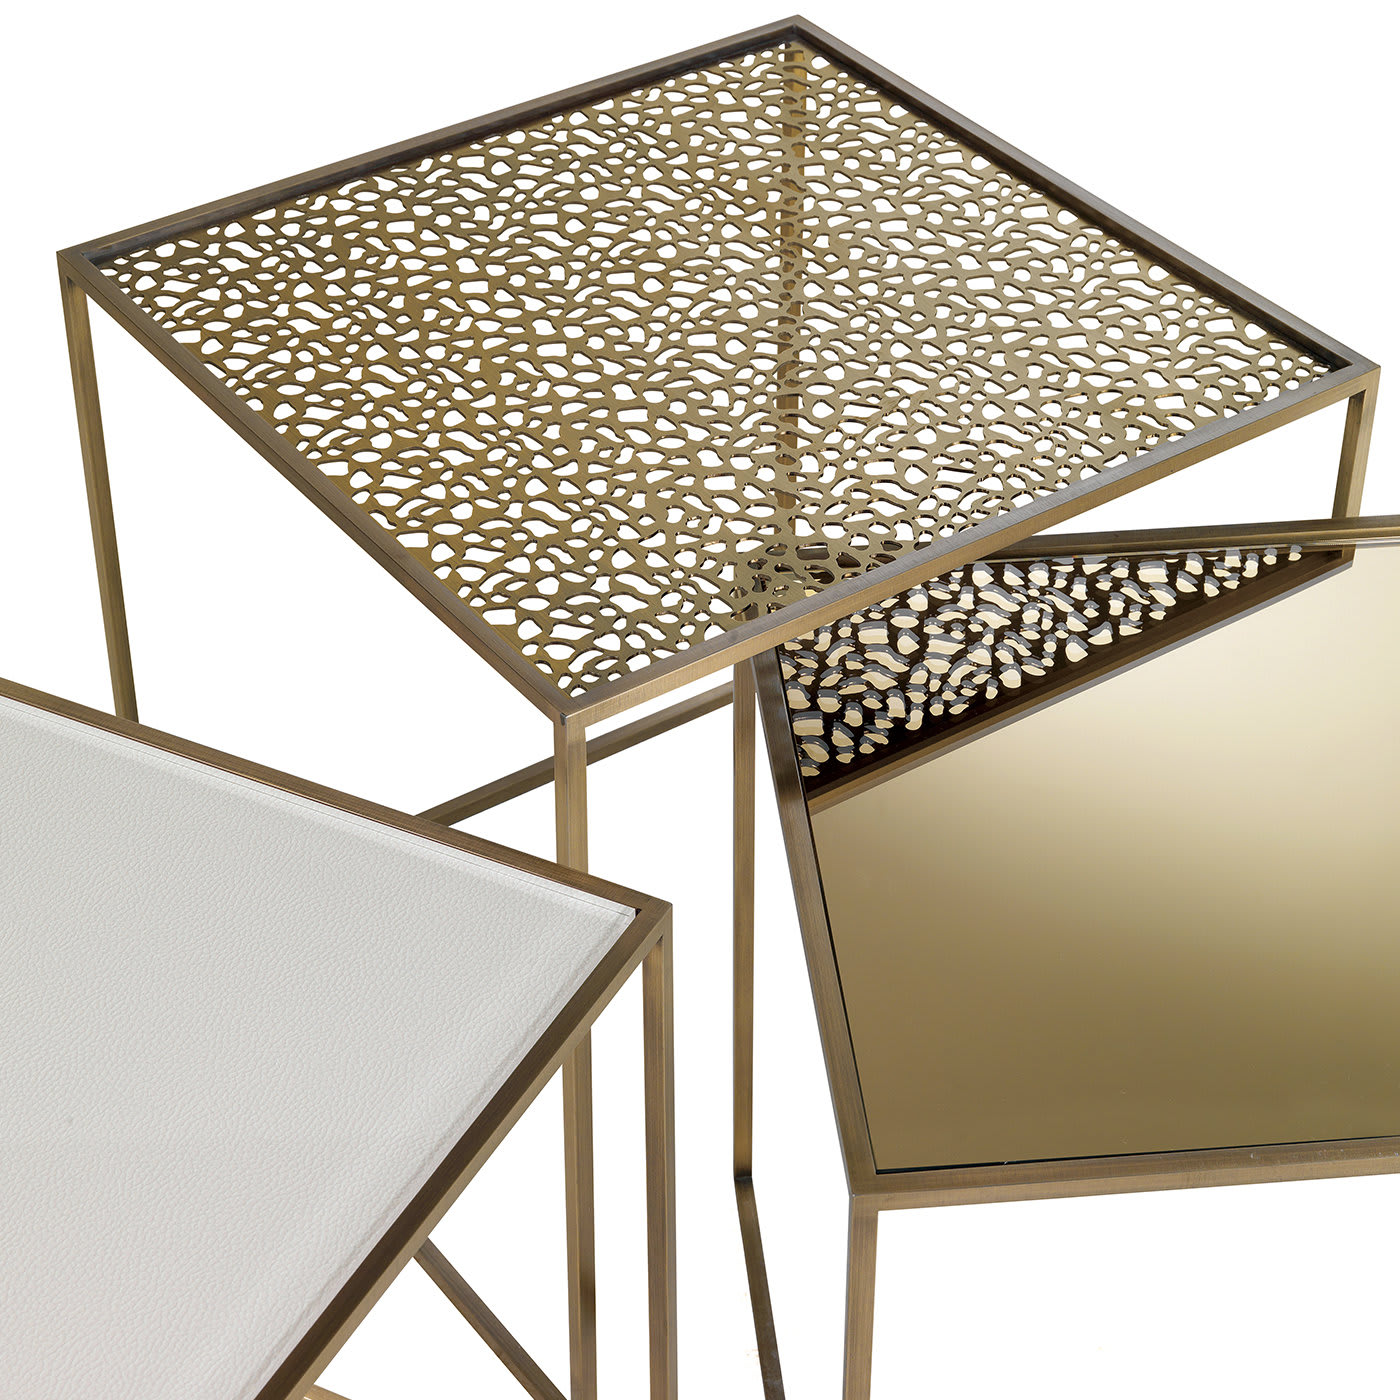 Friends Set of 2 Nesting Tables with Perforated Top - Zanaboni